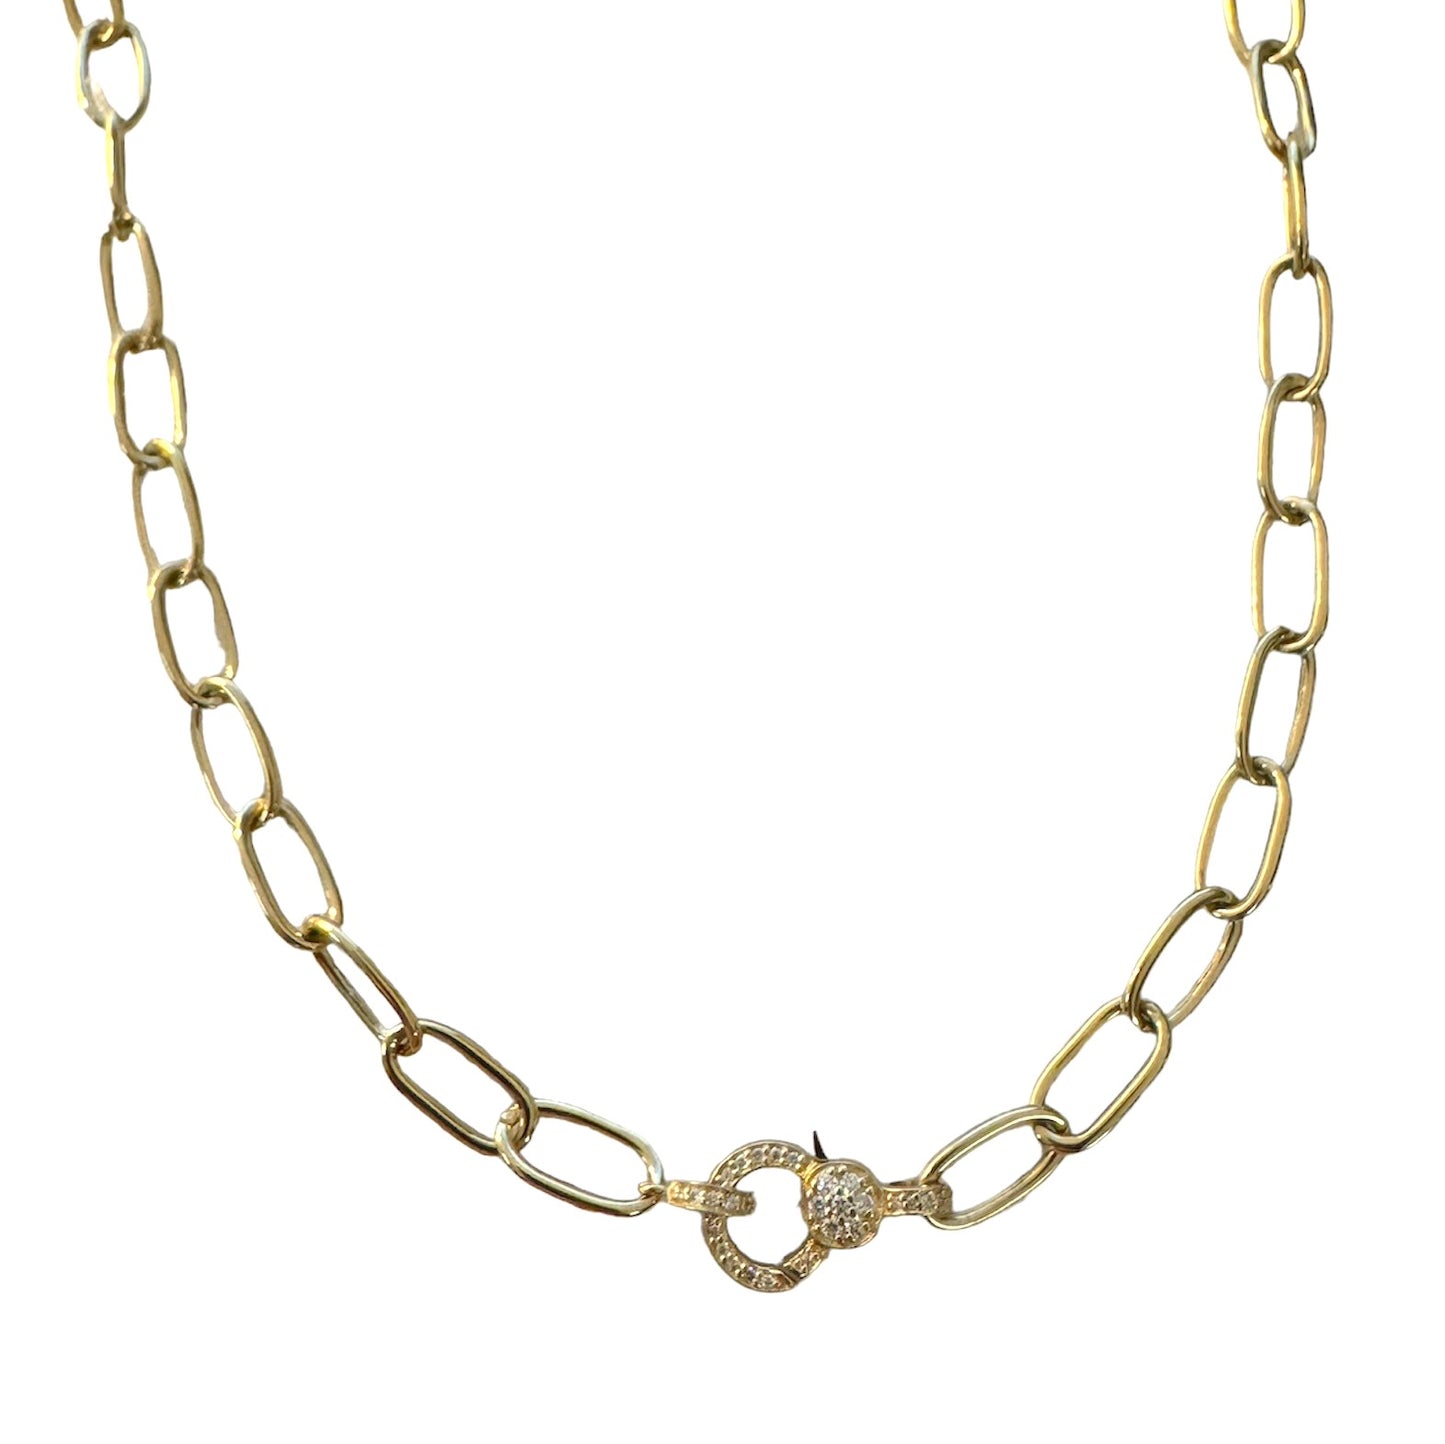 Gold Oval Link Necklace with Diamond Clasp